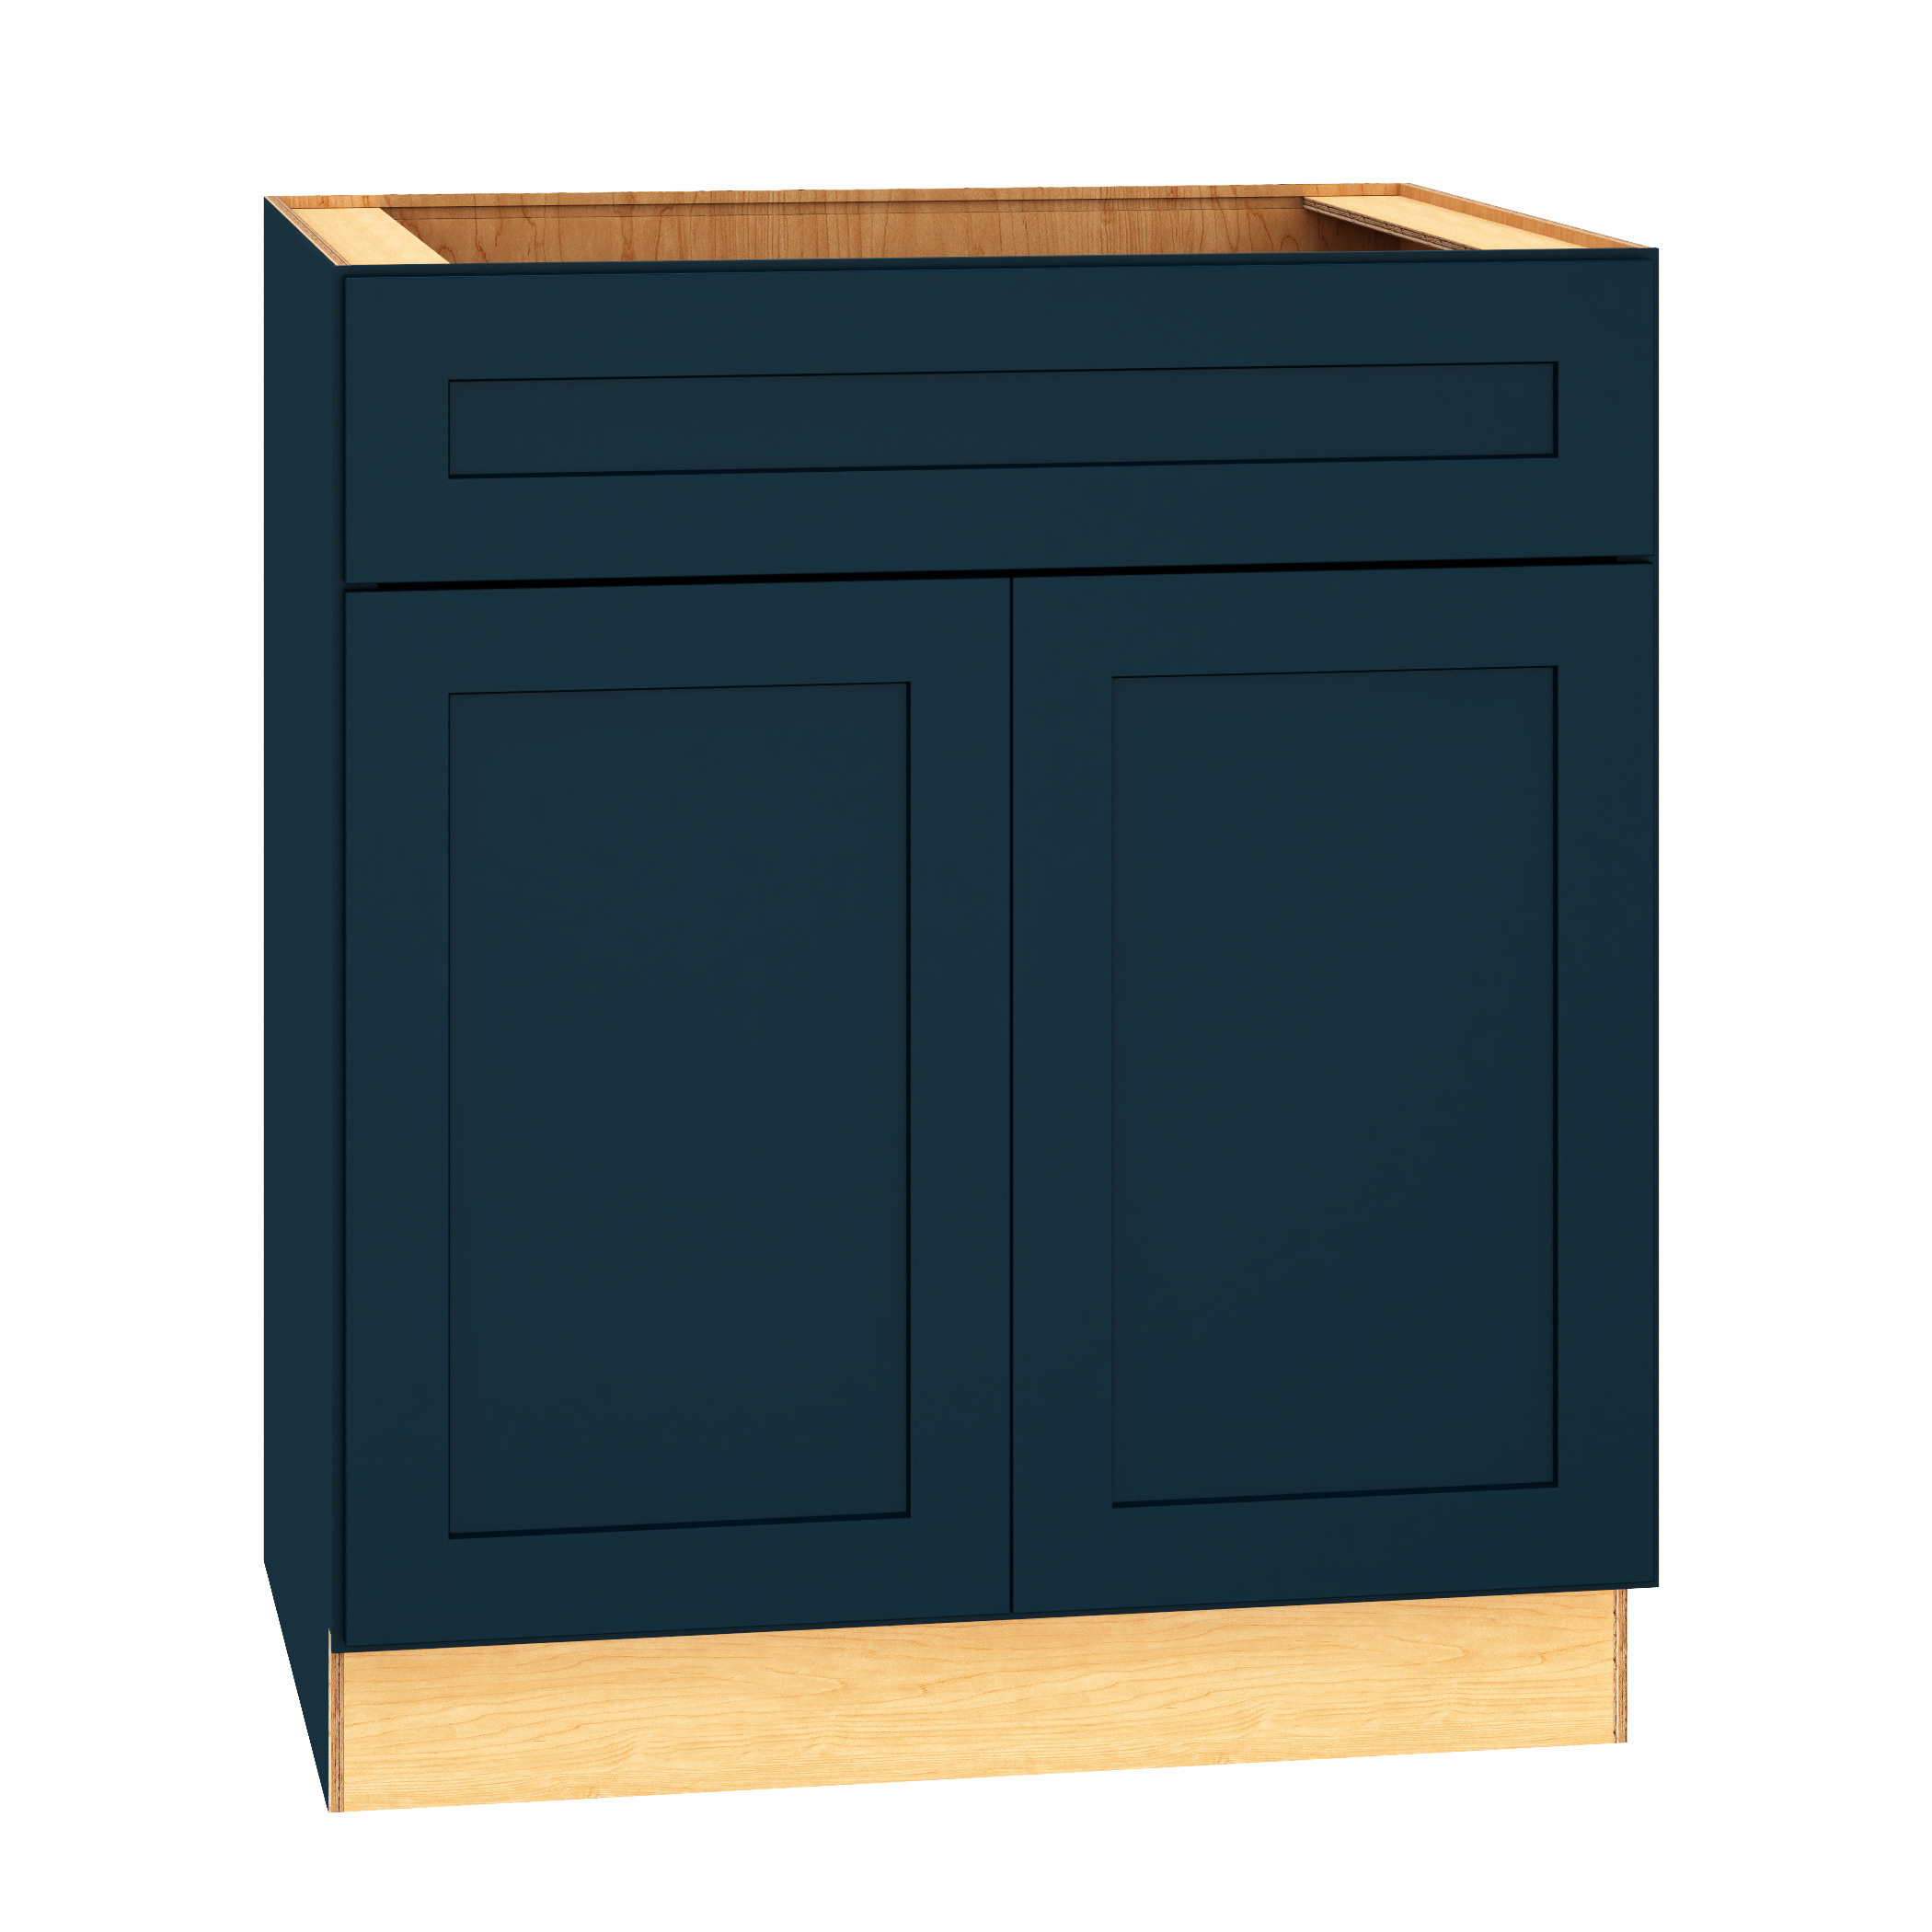 Base Cabinet With Double Doors in Admiral